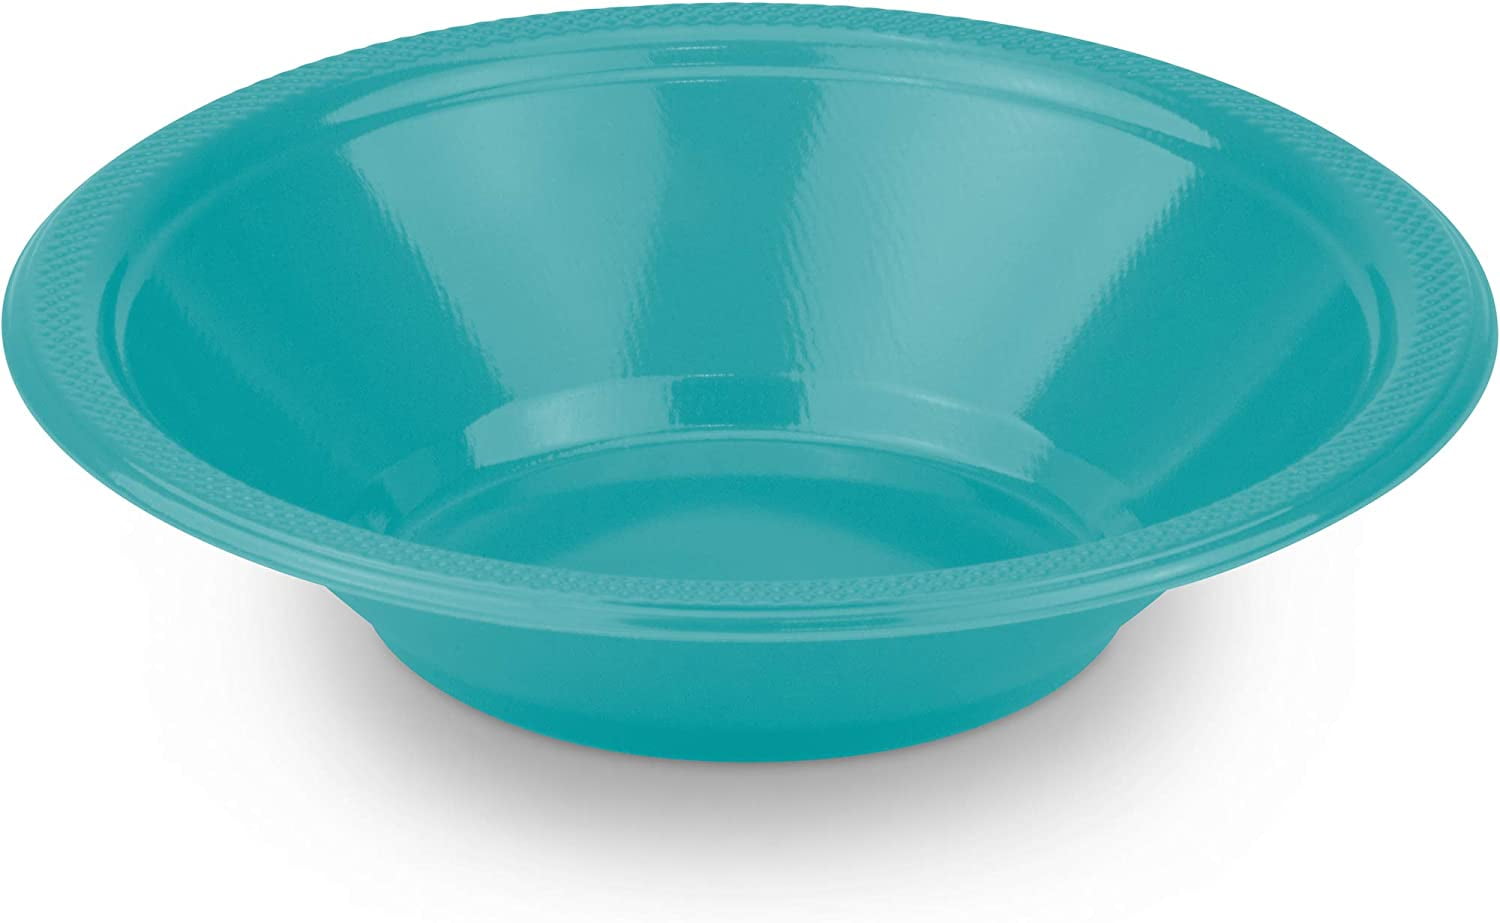 DecorRack 3 Serving Bowls with Lids, Extra Large Bowls, 3 Liter Capacity,  Lime Green, Blue, and Pink 